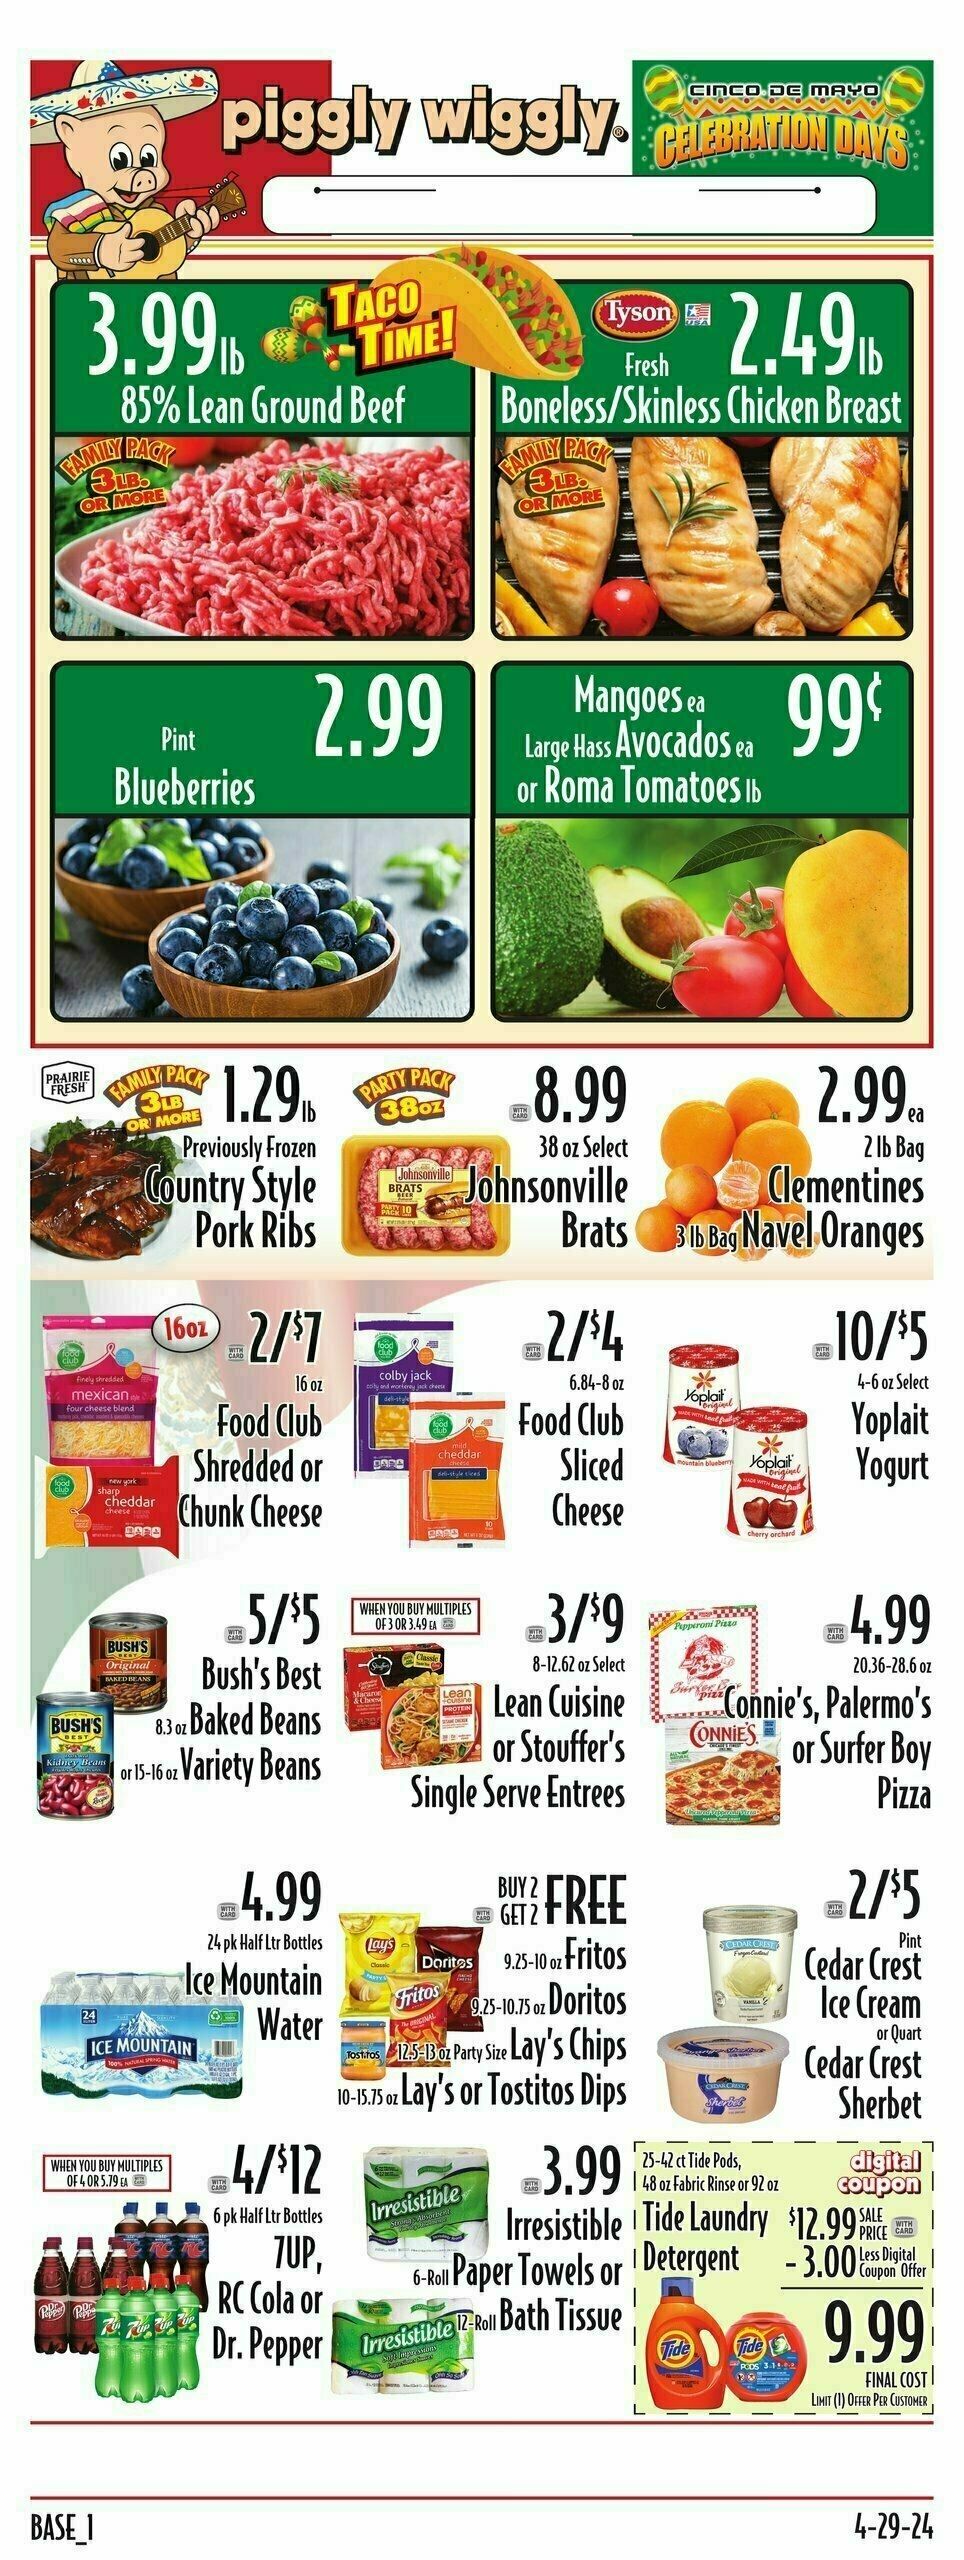 Piggly Wiggly Weekly Ad from May 1